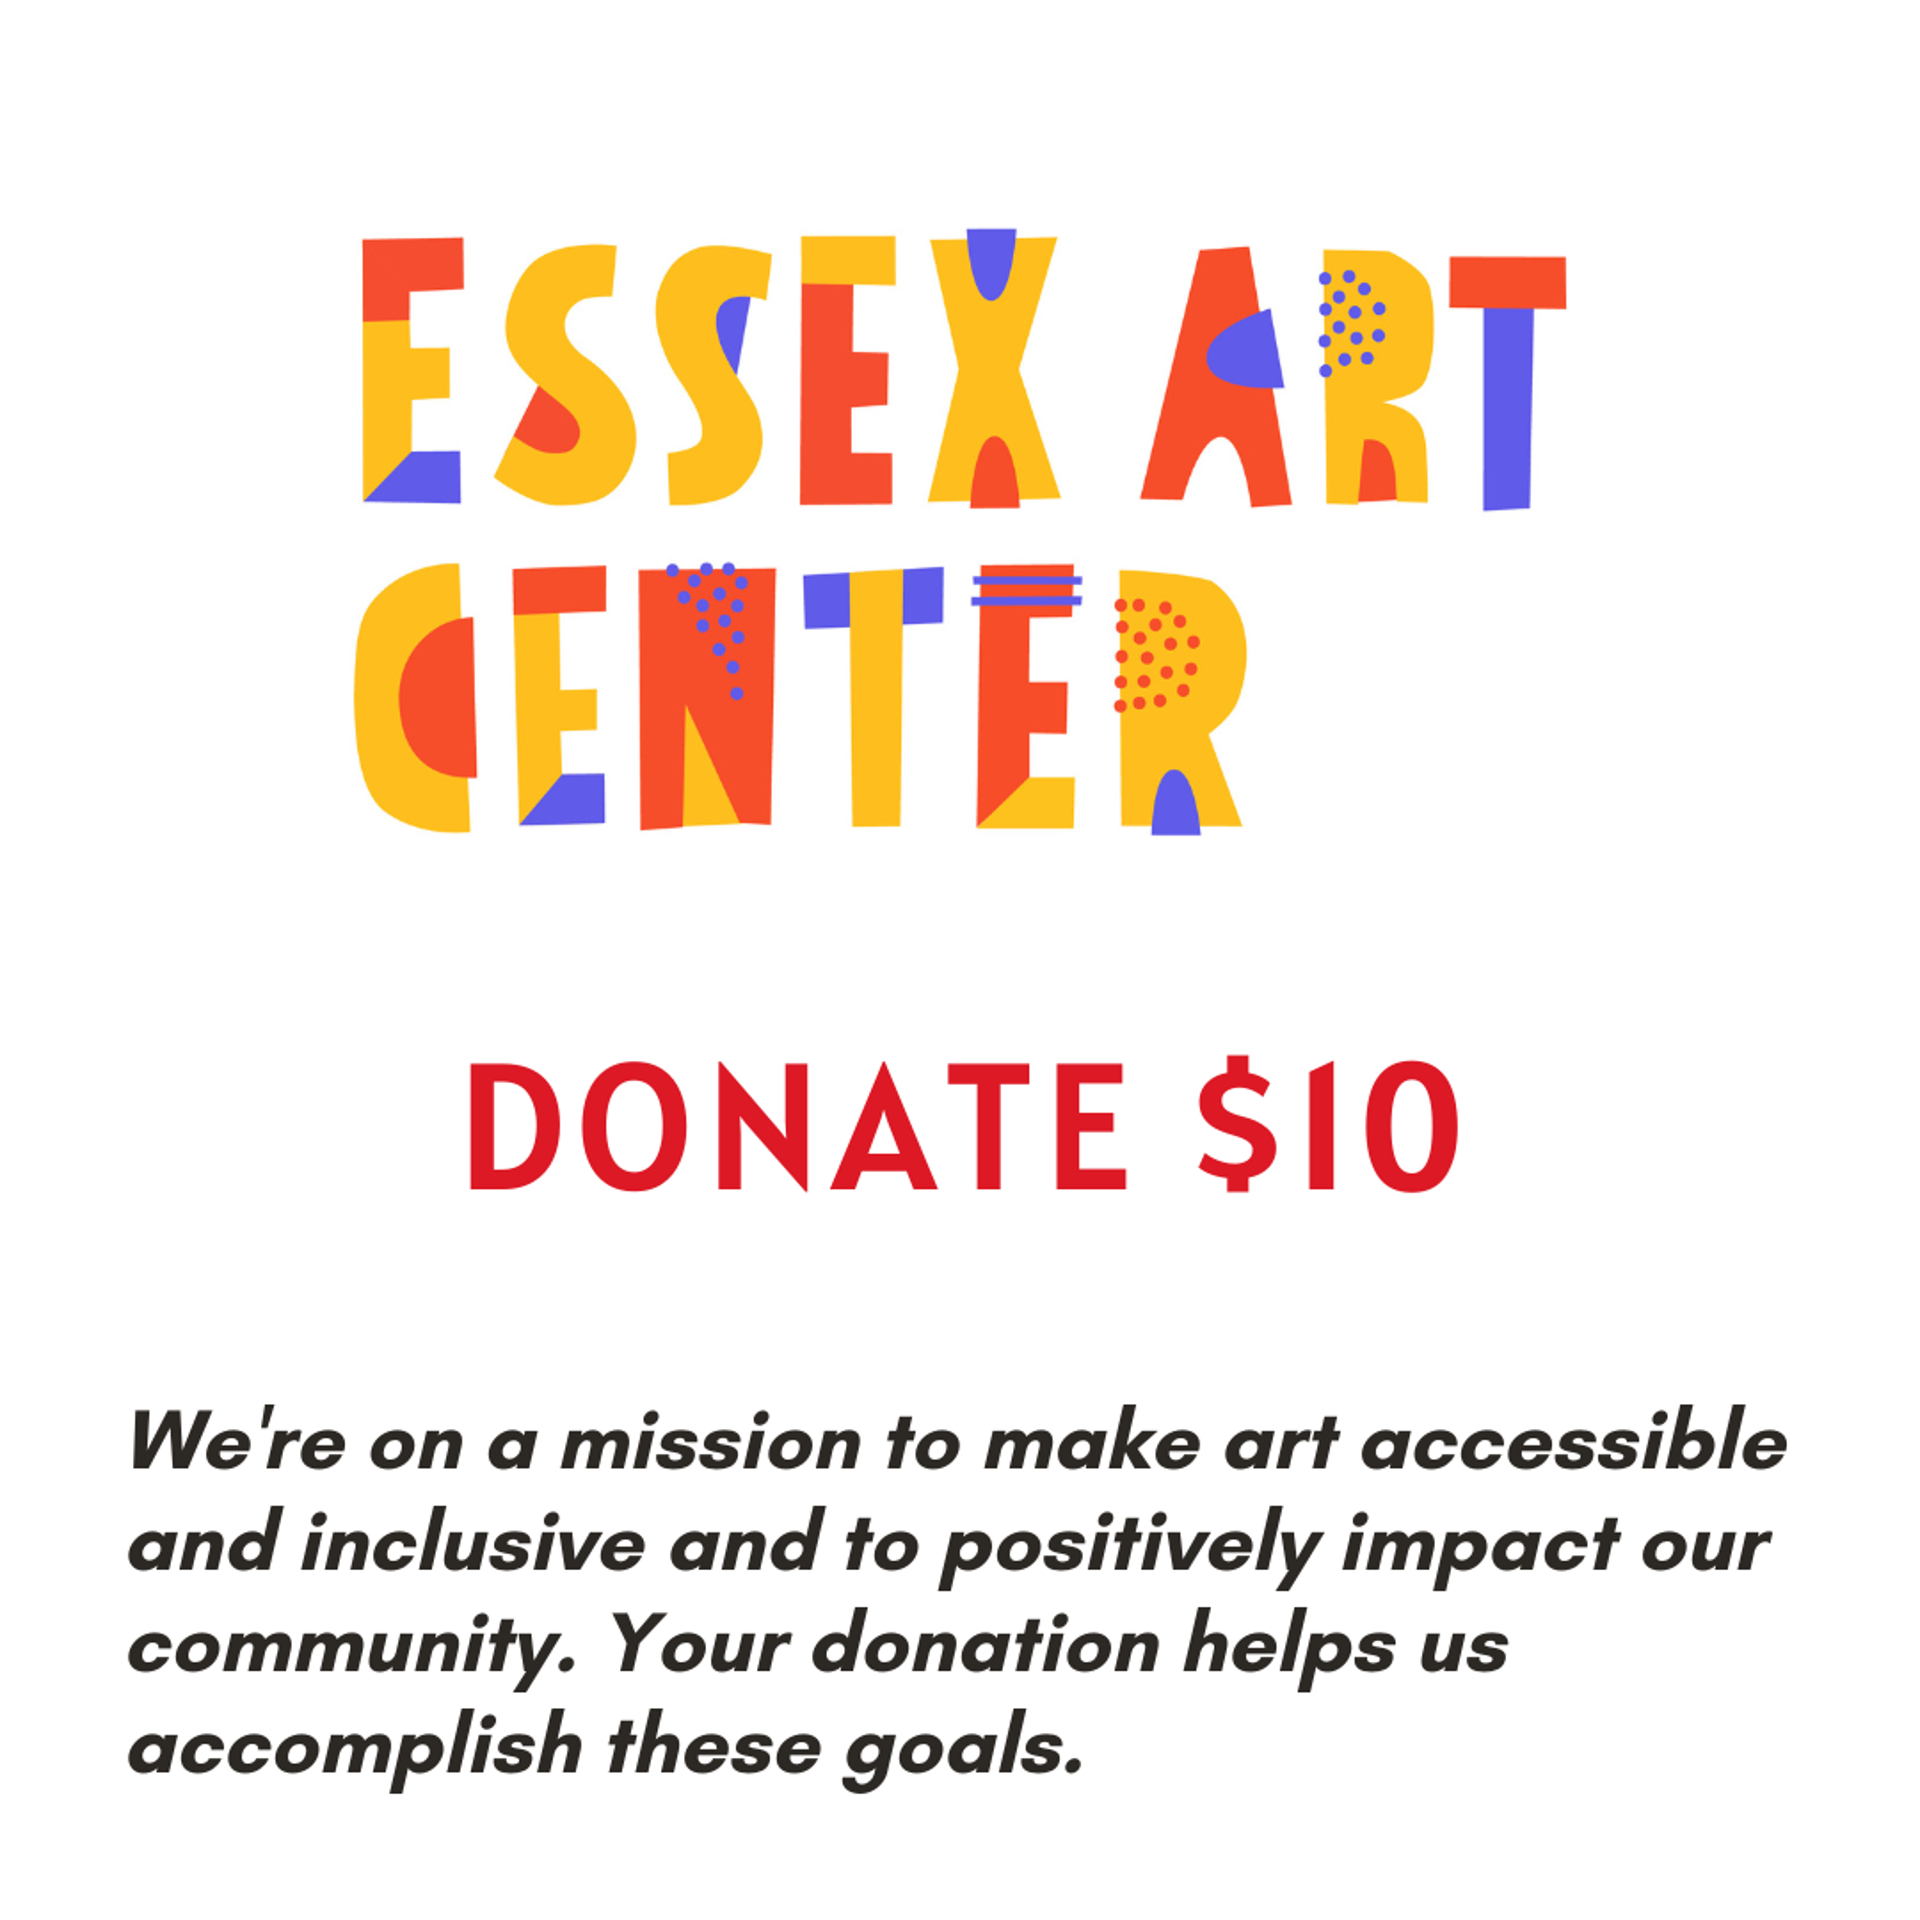 EAC Donation - $10 by EAC